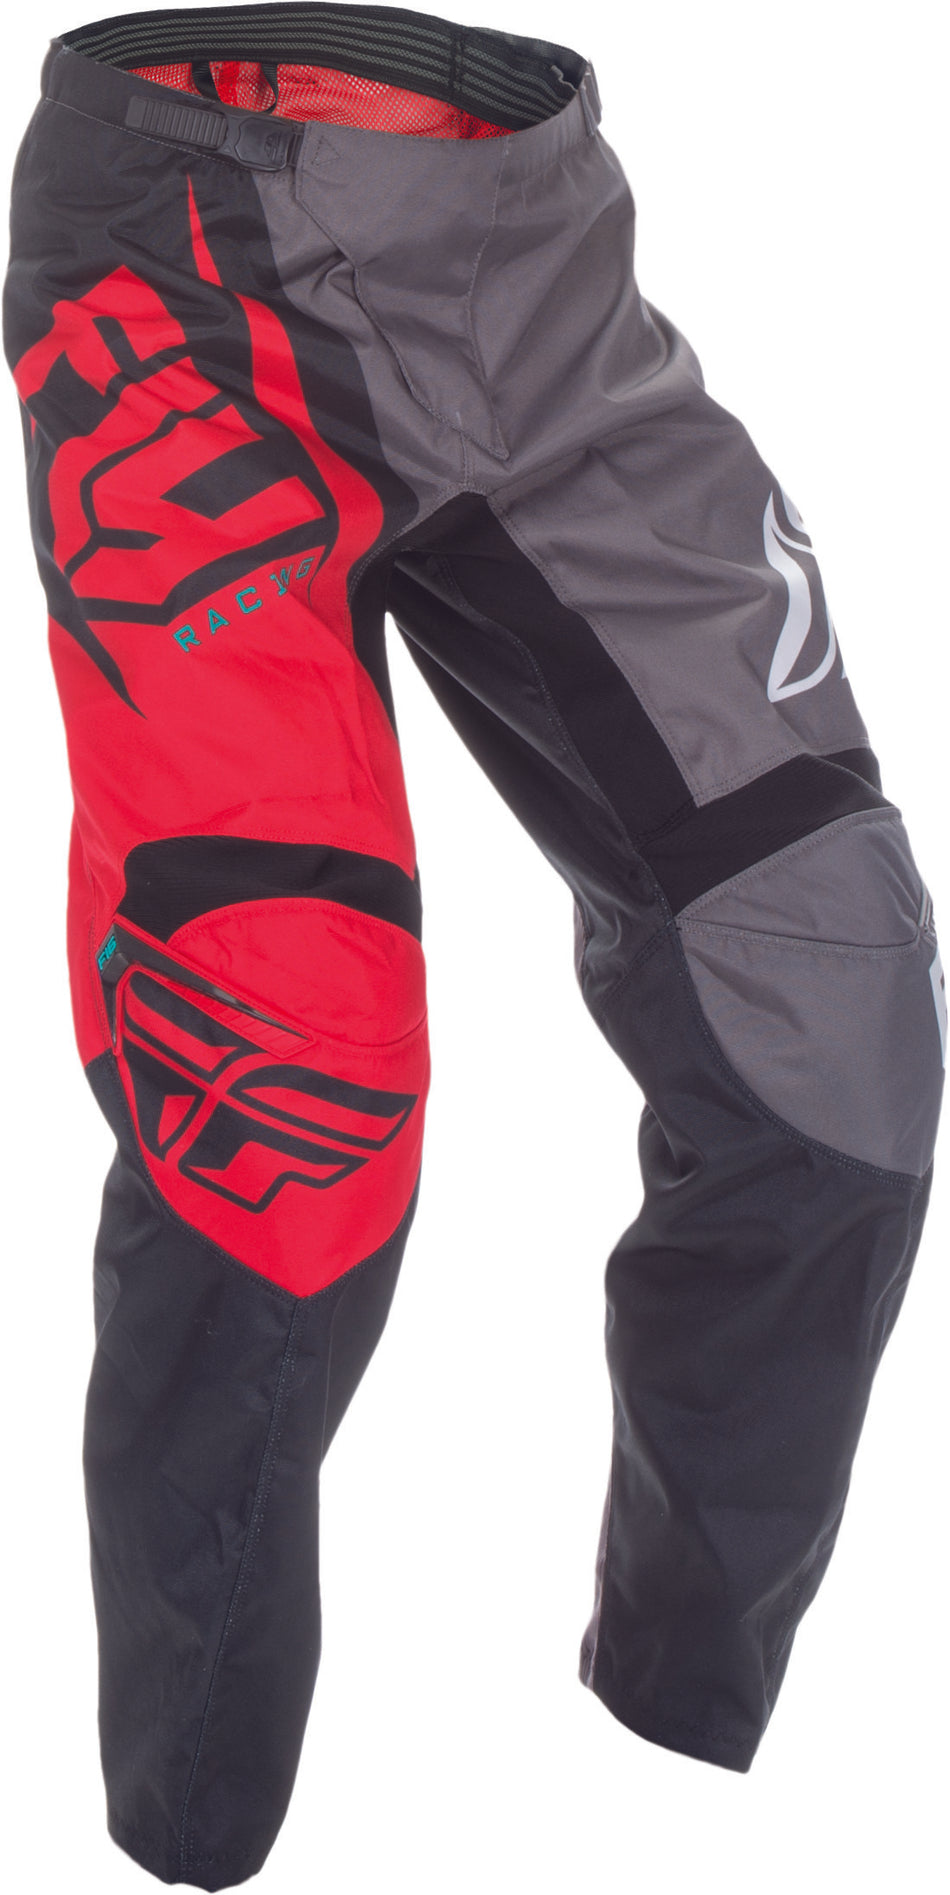 FLY RACING F-16 Pant Red/Black/Grey Sz 28s 370-93228S